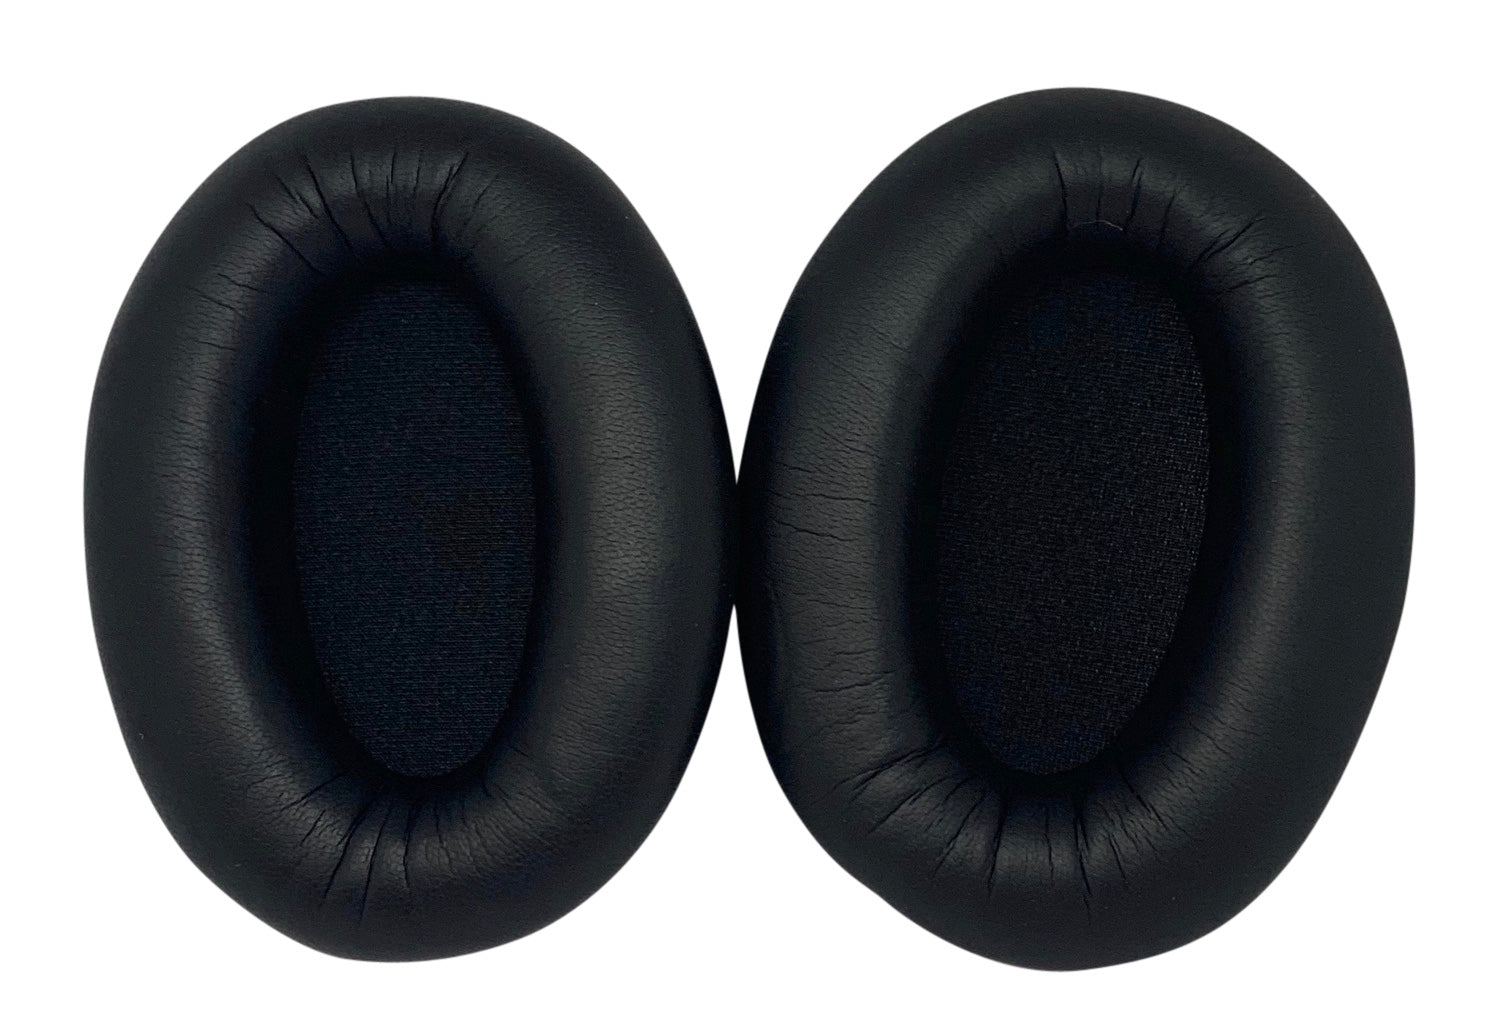 Replacement Ear Pad Cushions Parts for Sony WH-1000XM3 Wireless